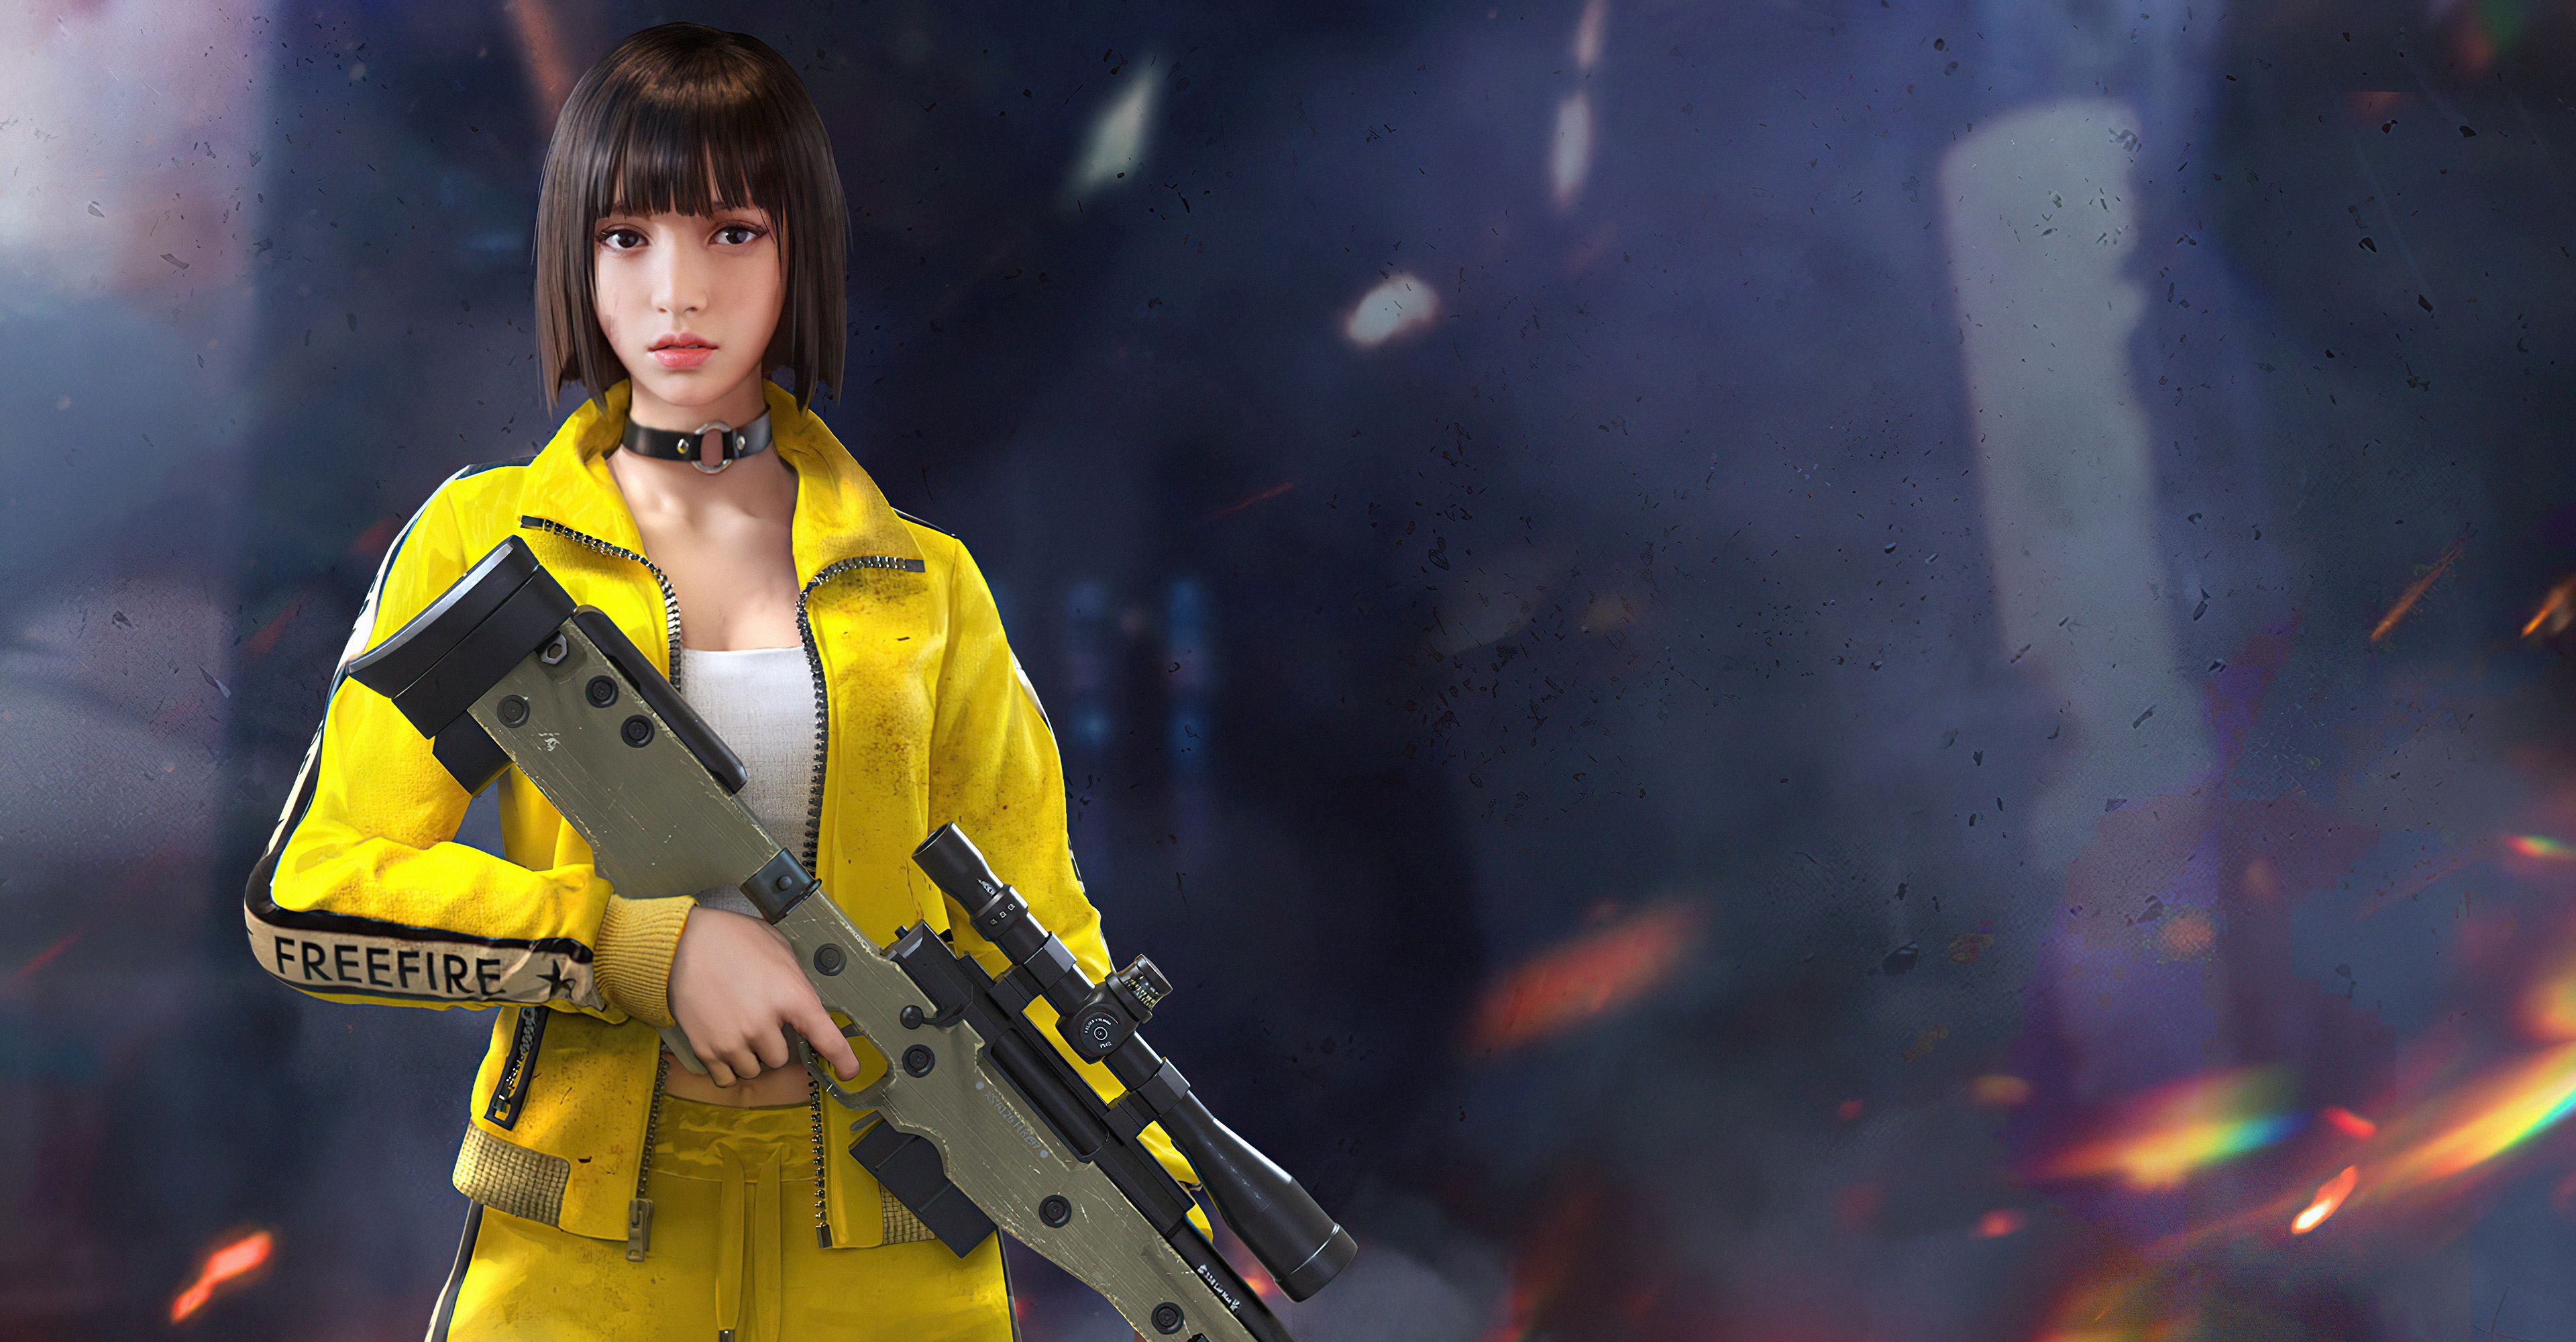 Kelly Garena Free Fire 4k, HD Games, 4k Wallpaper, Image, Background, Photo and Picture